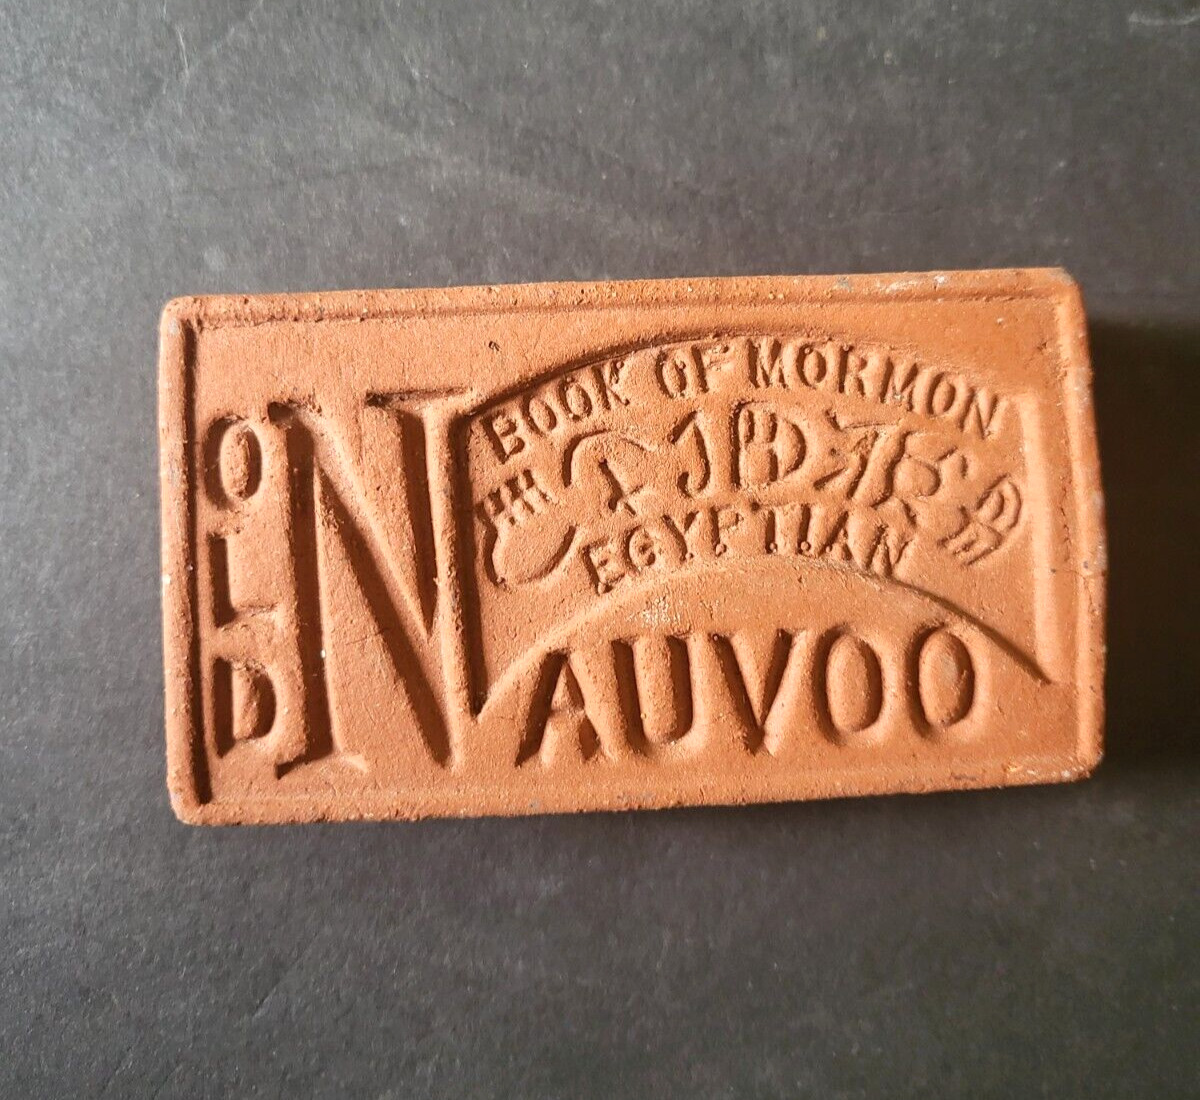 Vintage Old Nauvoo Book Of Mormon Egyptian Souvenir Size Brick - Paperweight